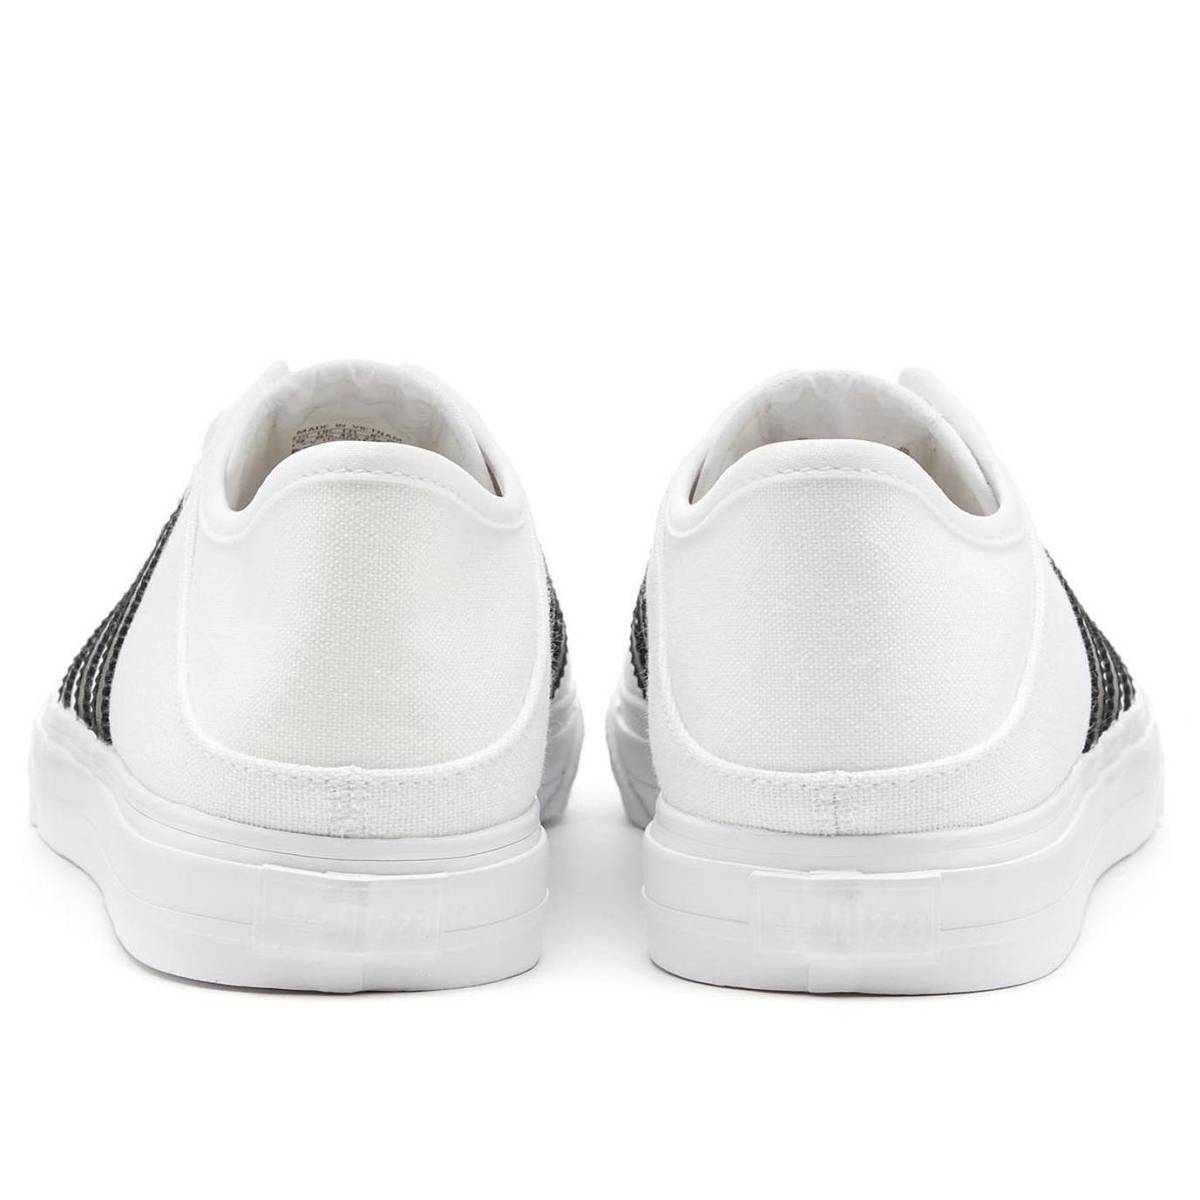 *adidas COLLAPSIBLE NIZZA LO white / black 24.5cm Adidas collapsible nitsa low 2way specification H67375